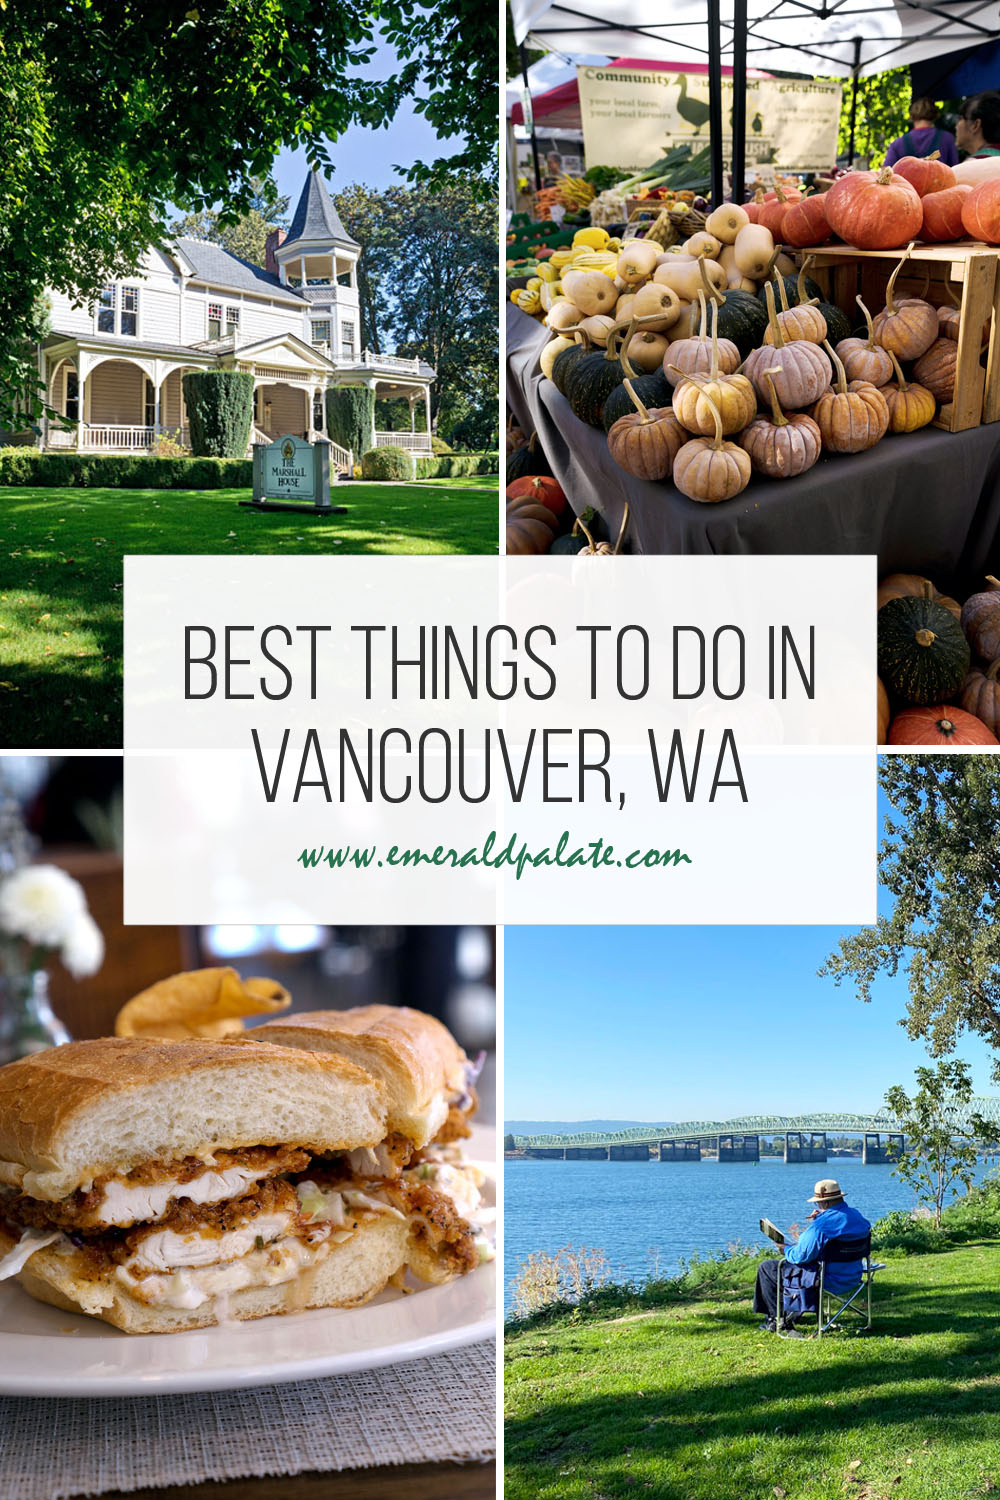 All the best things to do in Vancouver, WA